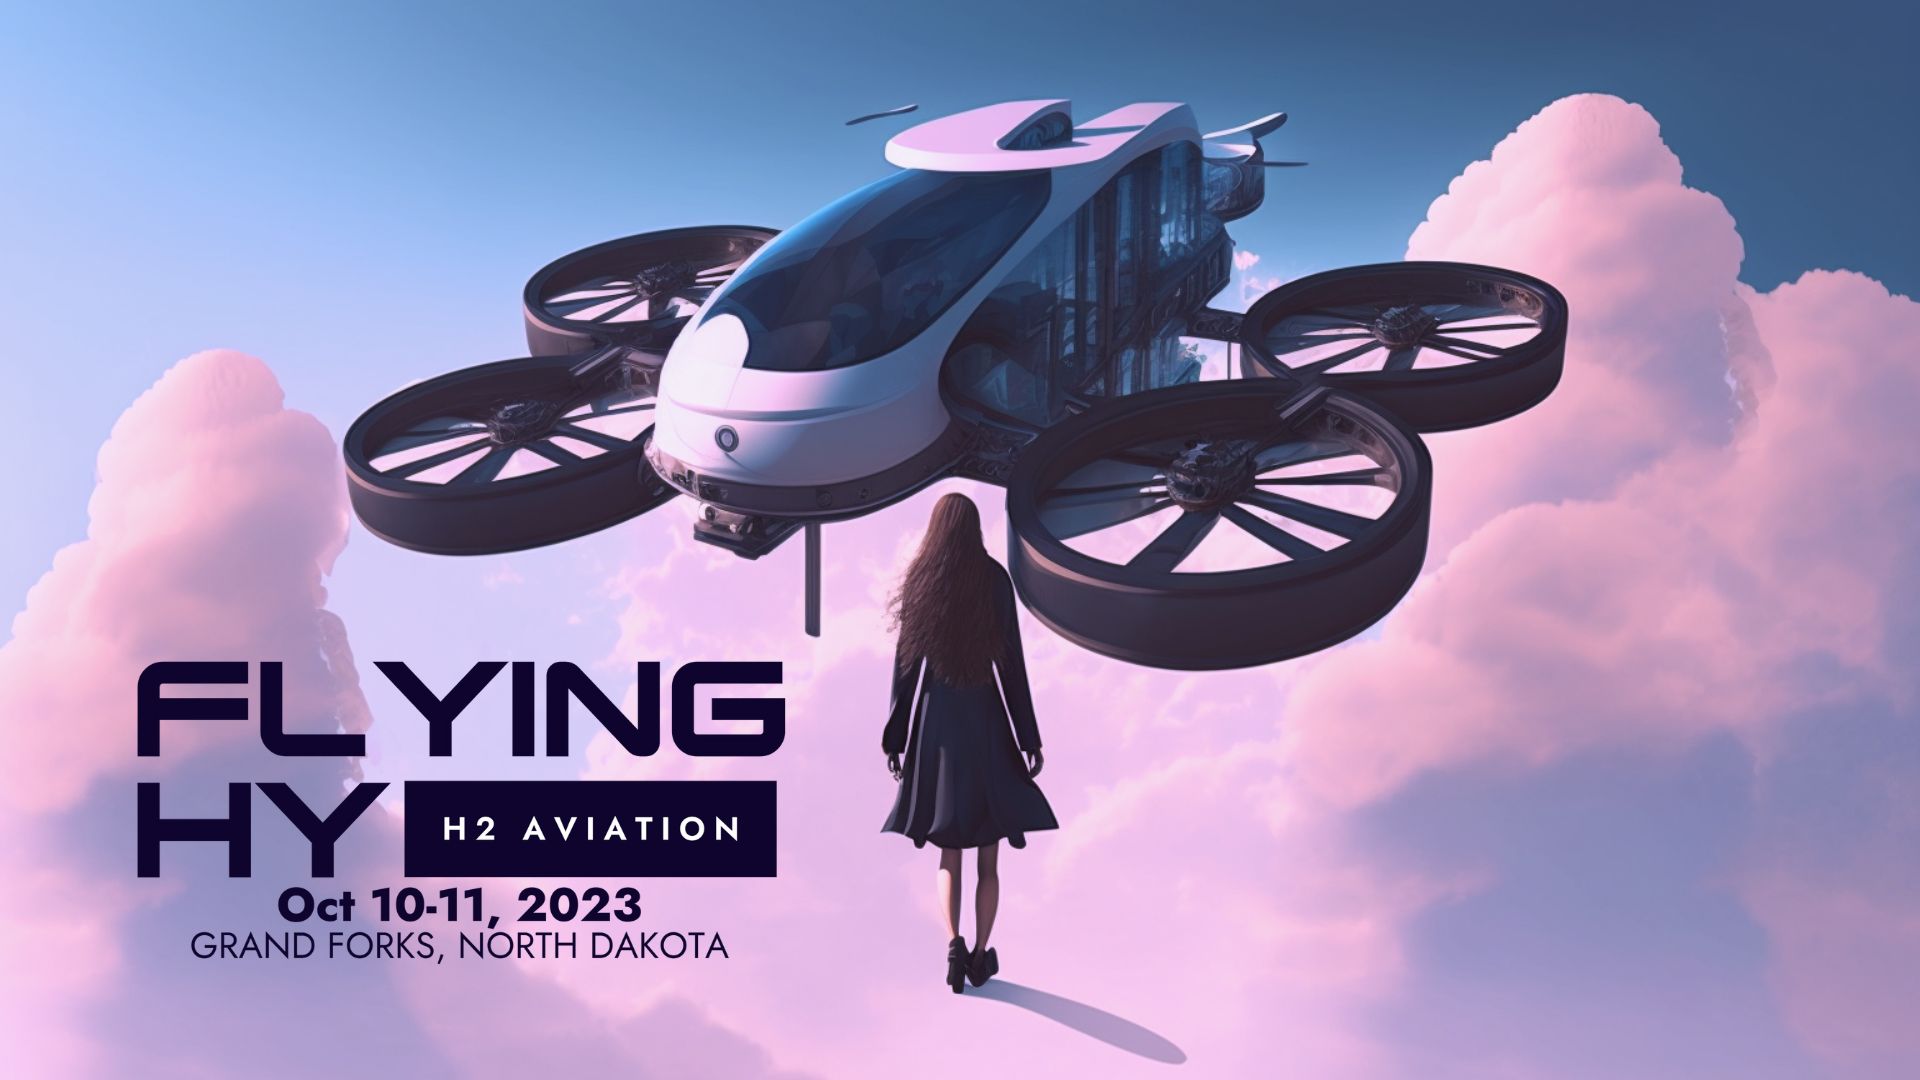 BBI International and HYSKY Society Partner to Co-Locate UAS Summit and Expo with FLYING HY, Advancing Innovation in Aviation